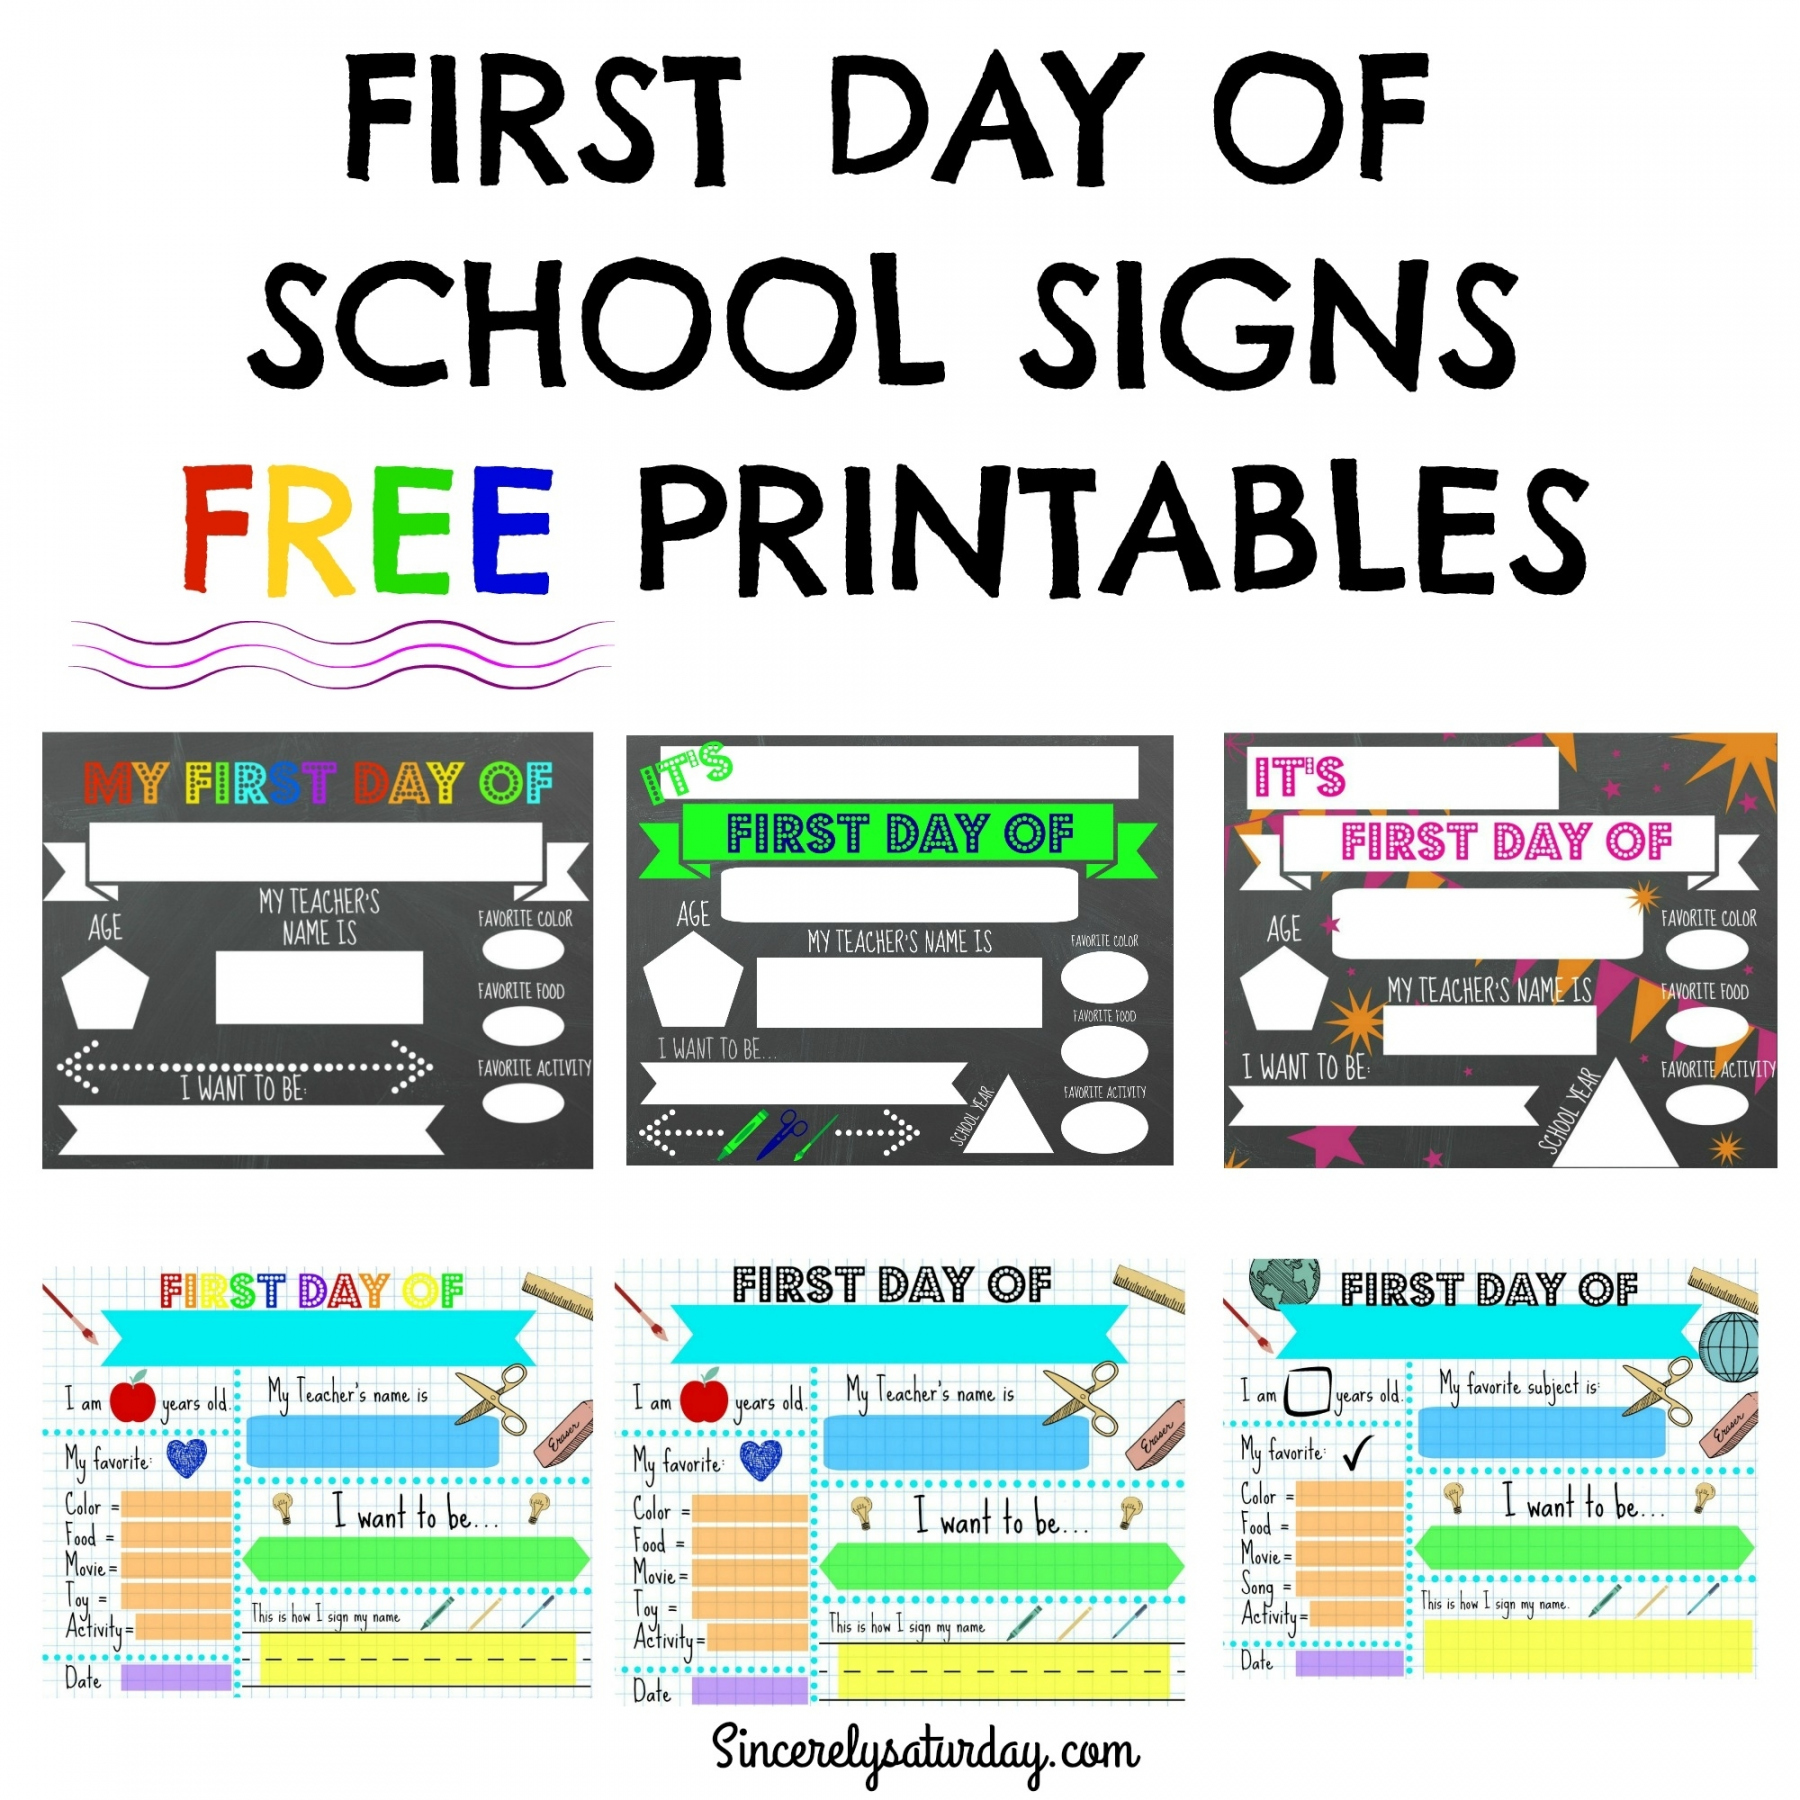 FREE PRINTABLE FIRST DAY OF SCHOOL SIGNS - Sincerely Saturday - FREE Printables - First Day Of School Signs Free Printable